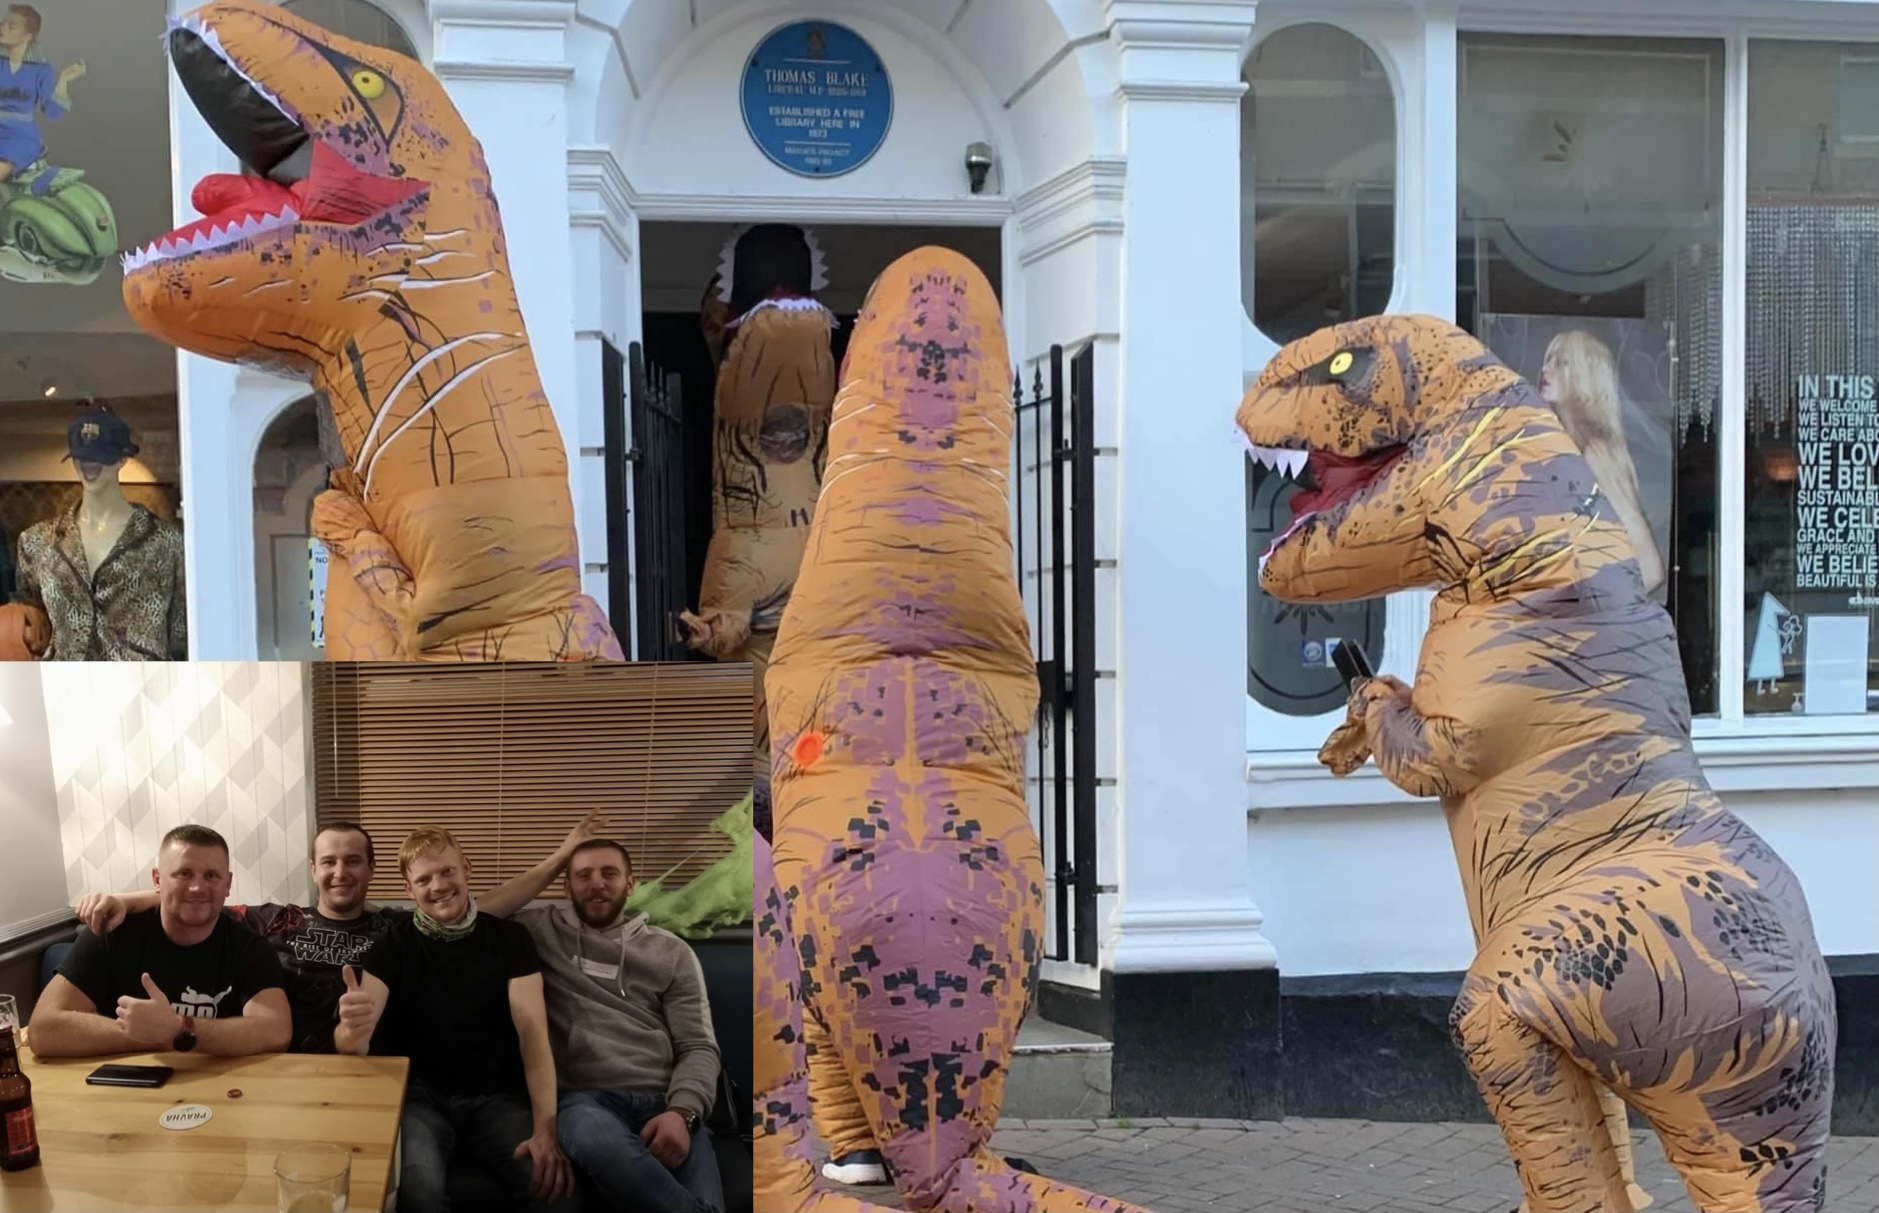 NEWS | Four men bring smiles to Ross-on-Wye